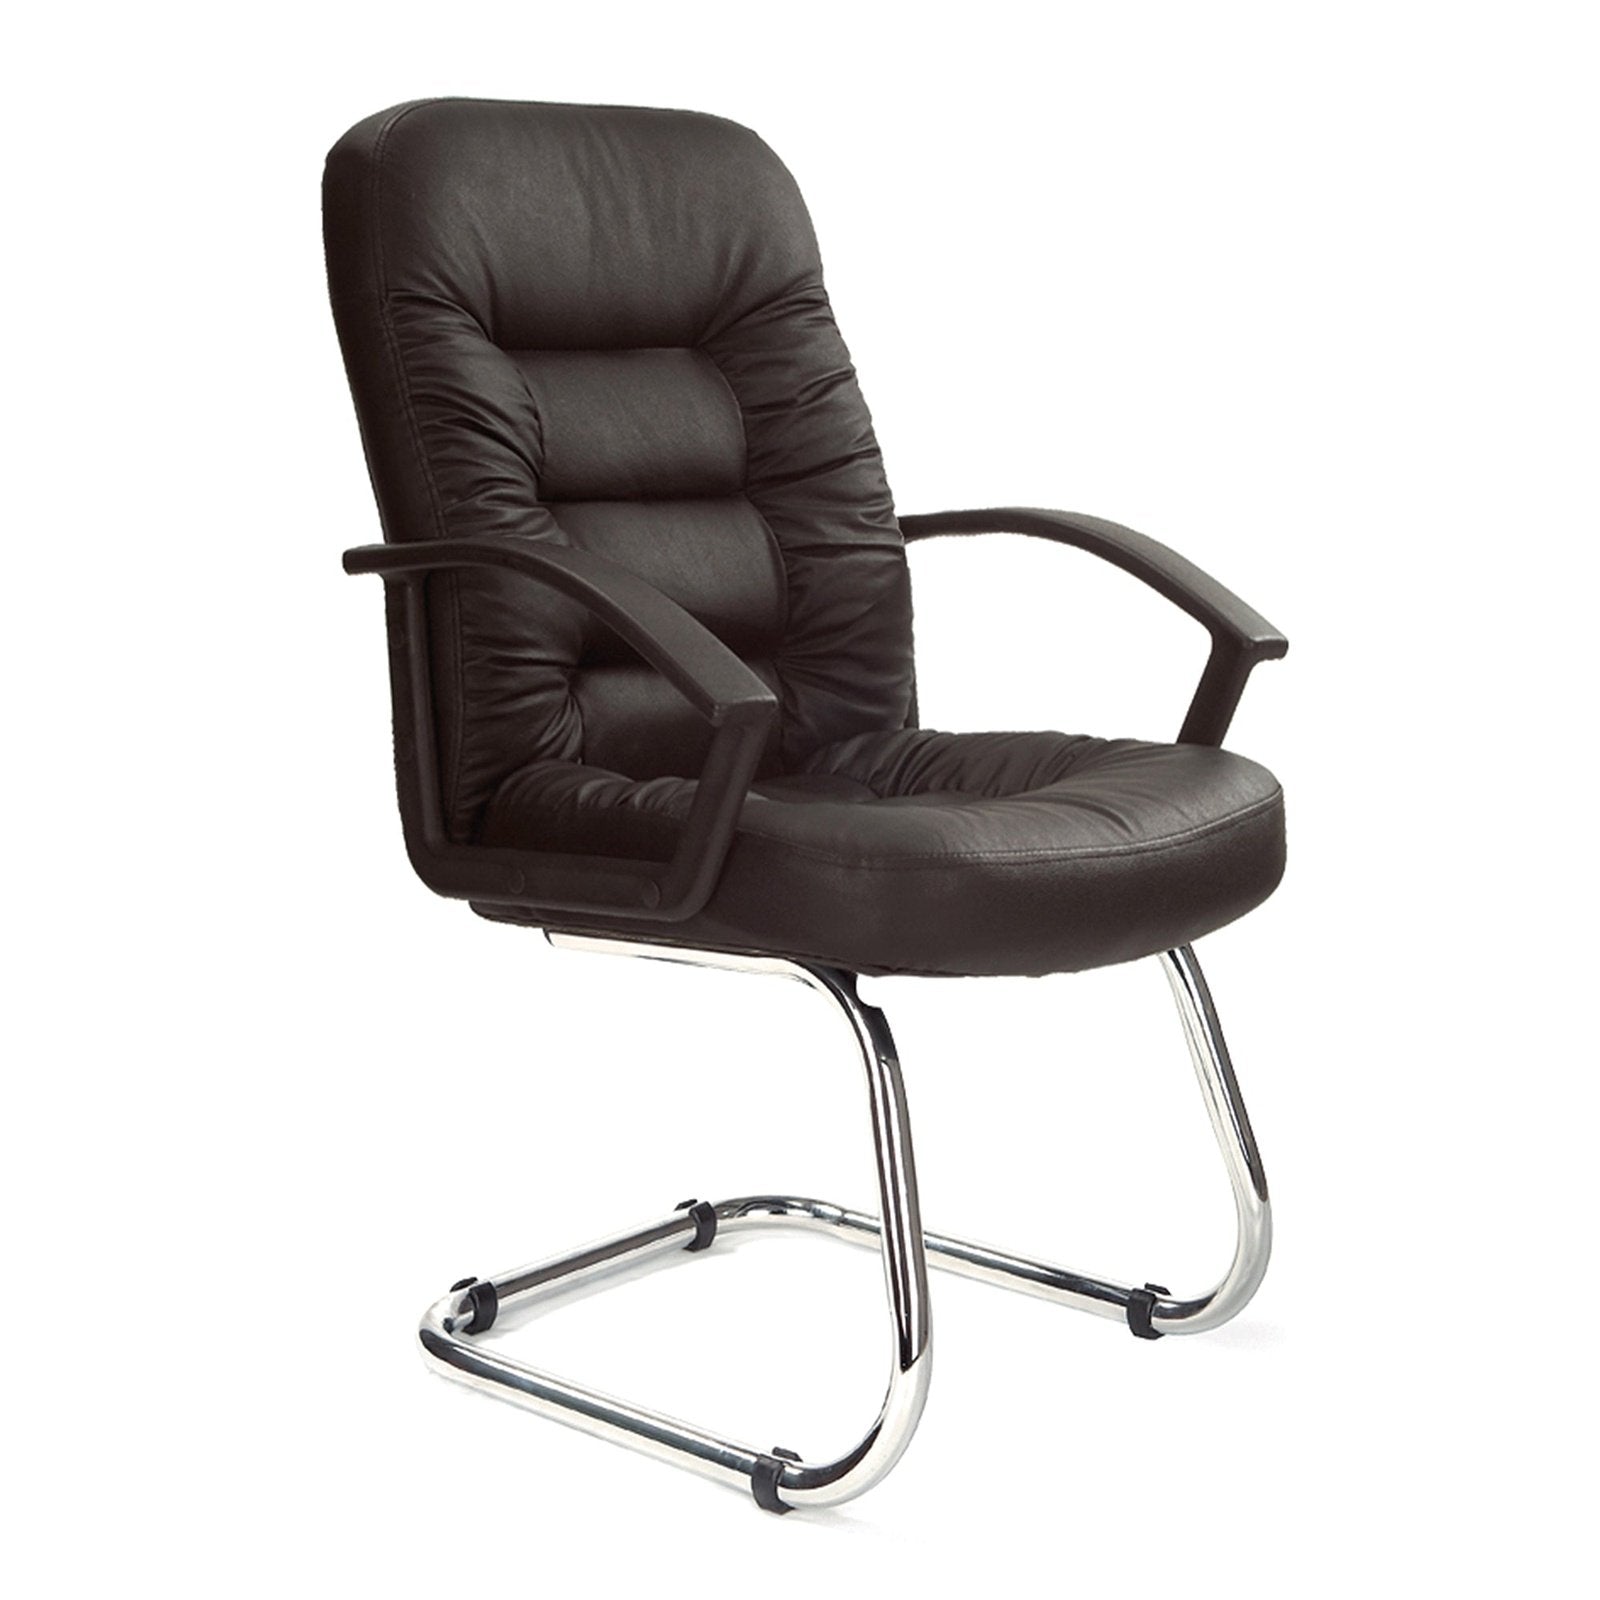 High Back Leather Faced Executive Visitor Armchair with Ruched Panel Detailing and Chrome Cantilever Base - Black - Office Products Online